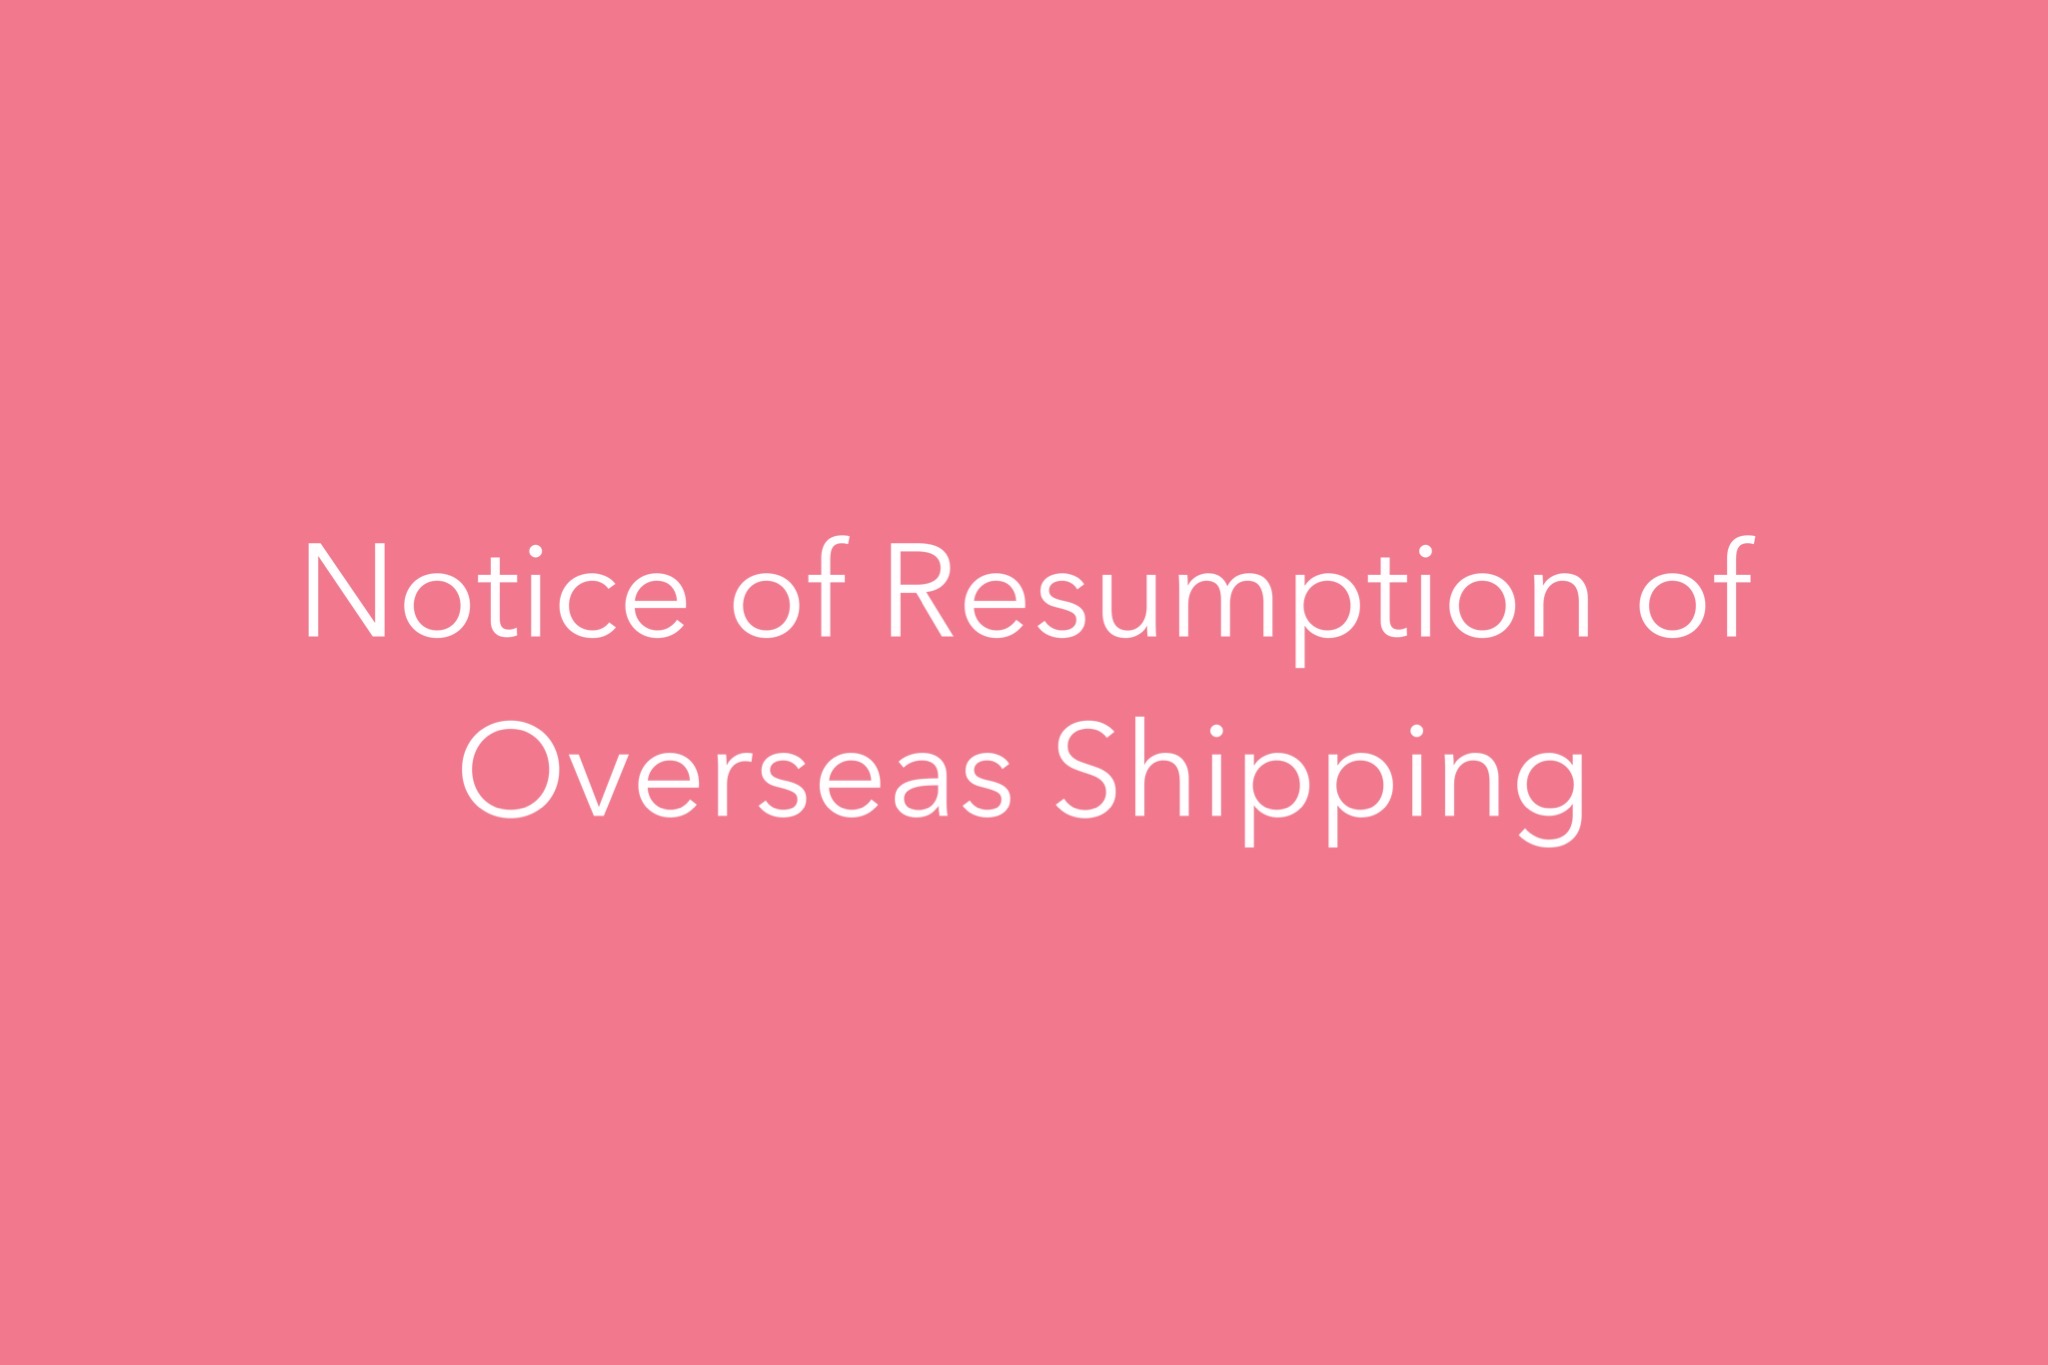 Notice of Resumption of Overseas Shipping